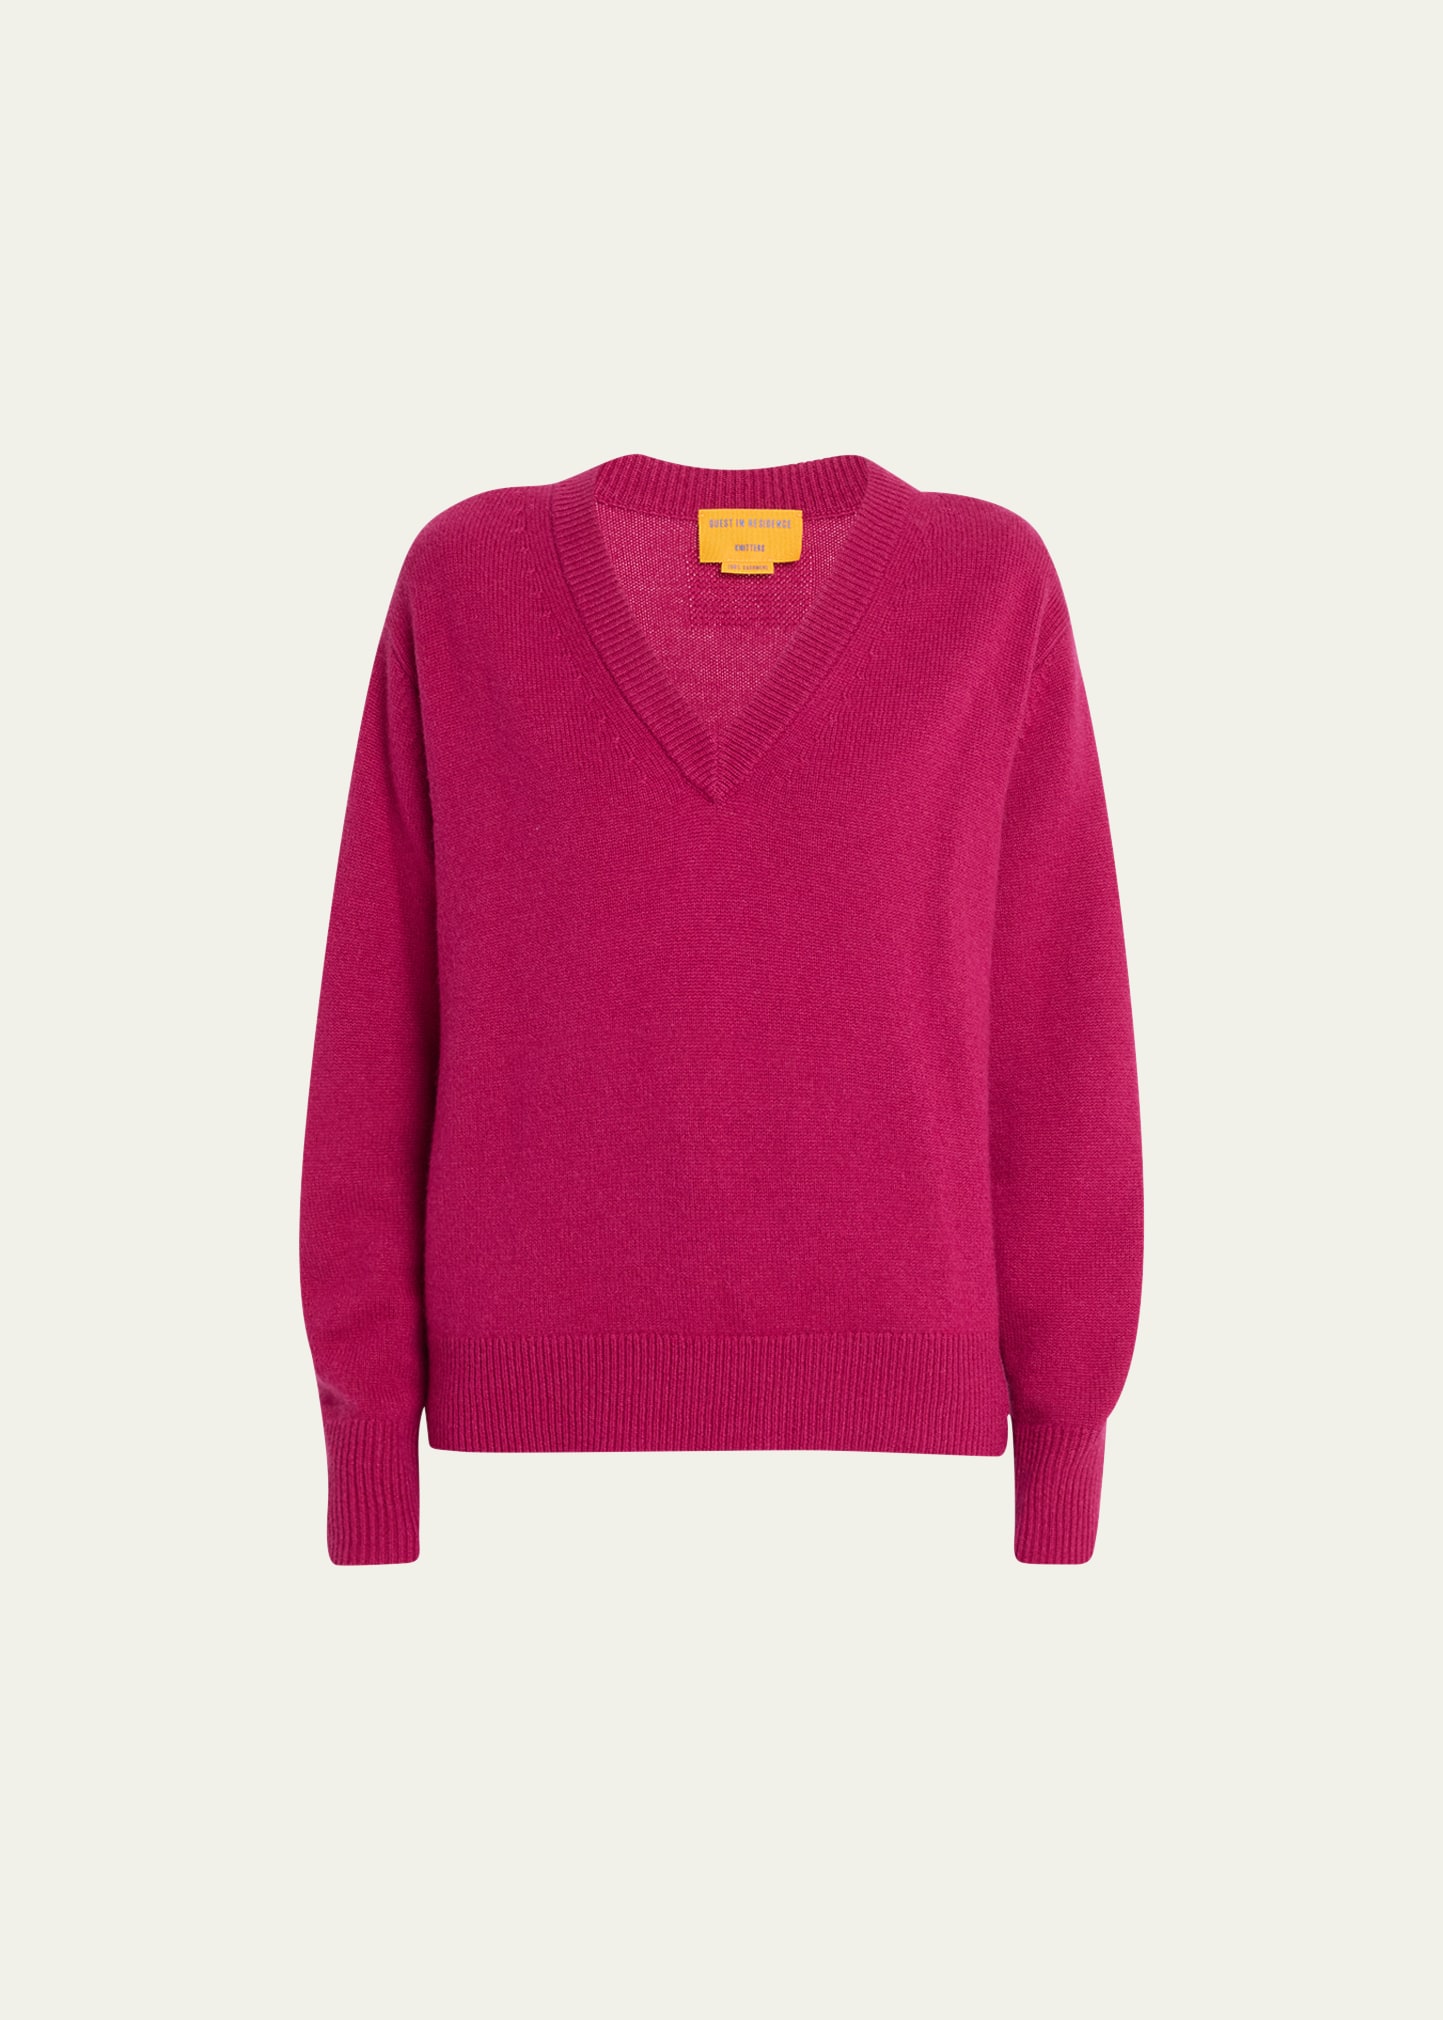 GUEST IN RESIDENCE THE V CASHMERE PULLOVER SWEATER